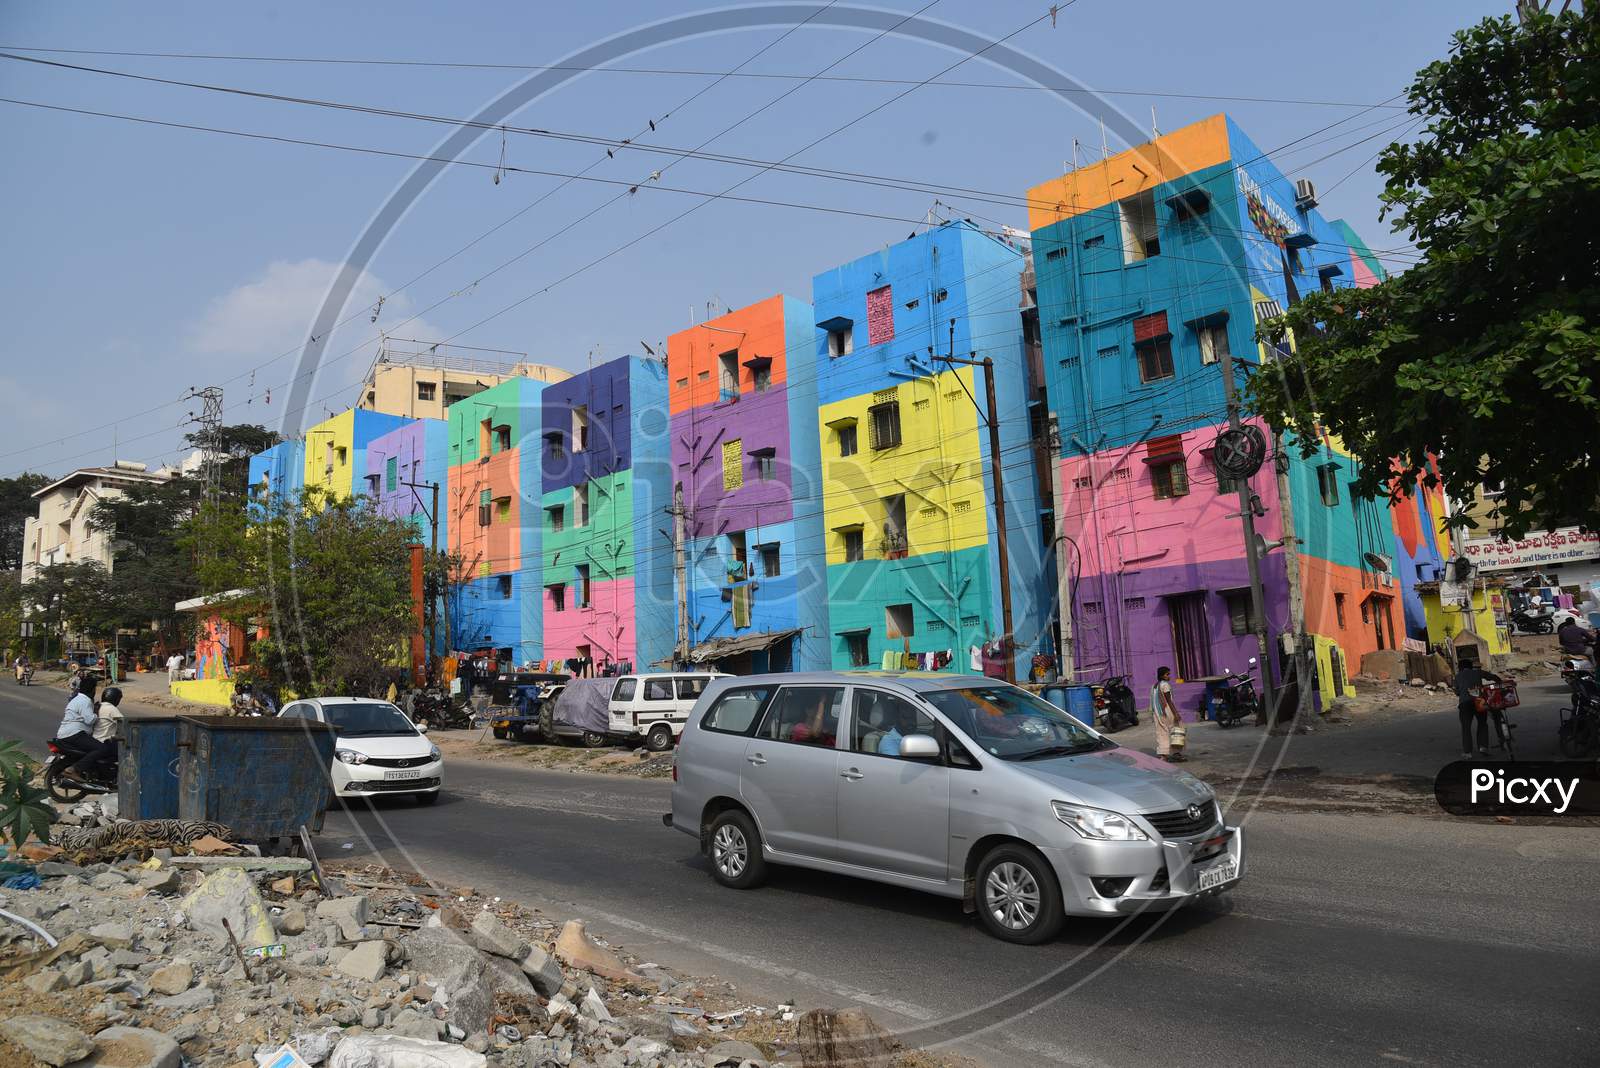 Colourful Paintings on resident buildings in a Slum at Film Nagar,Hyderabad by MISAAL HYDERABAD